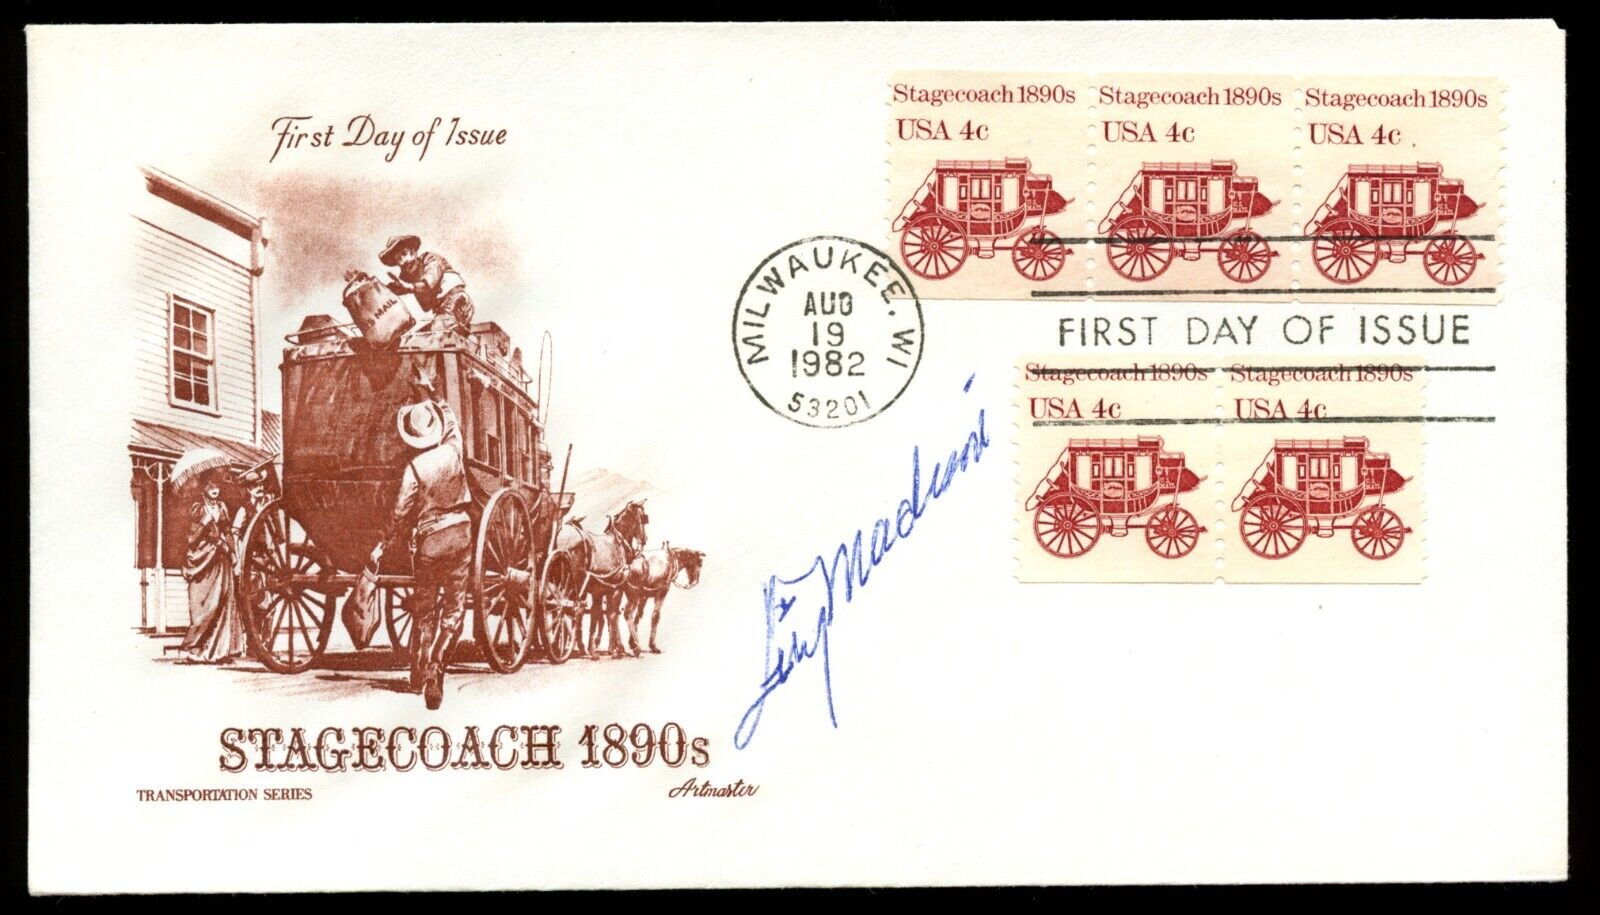 Guy Madison d1996 signed autograph Postal Cover FDC Actor Wild Bill Hickok BAS